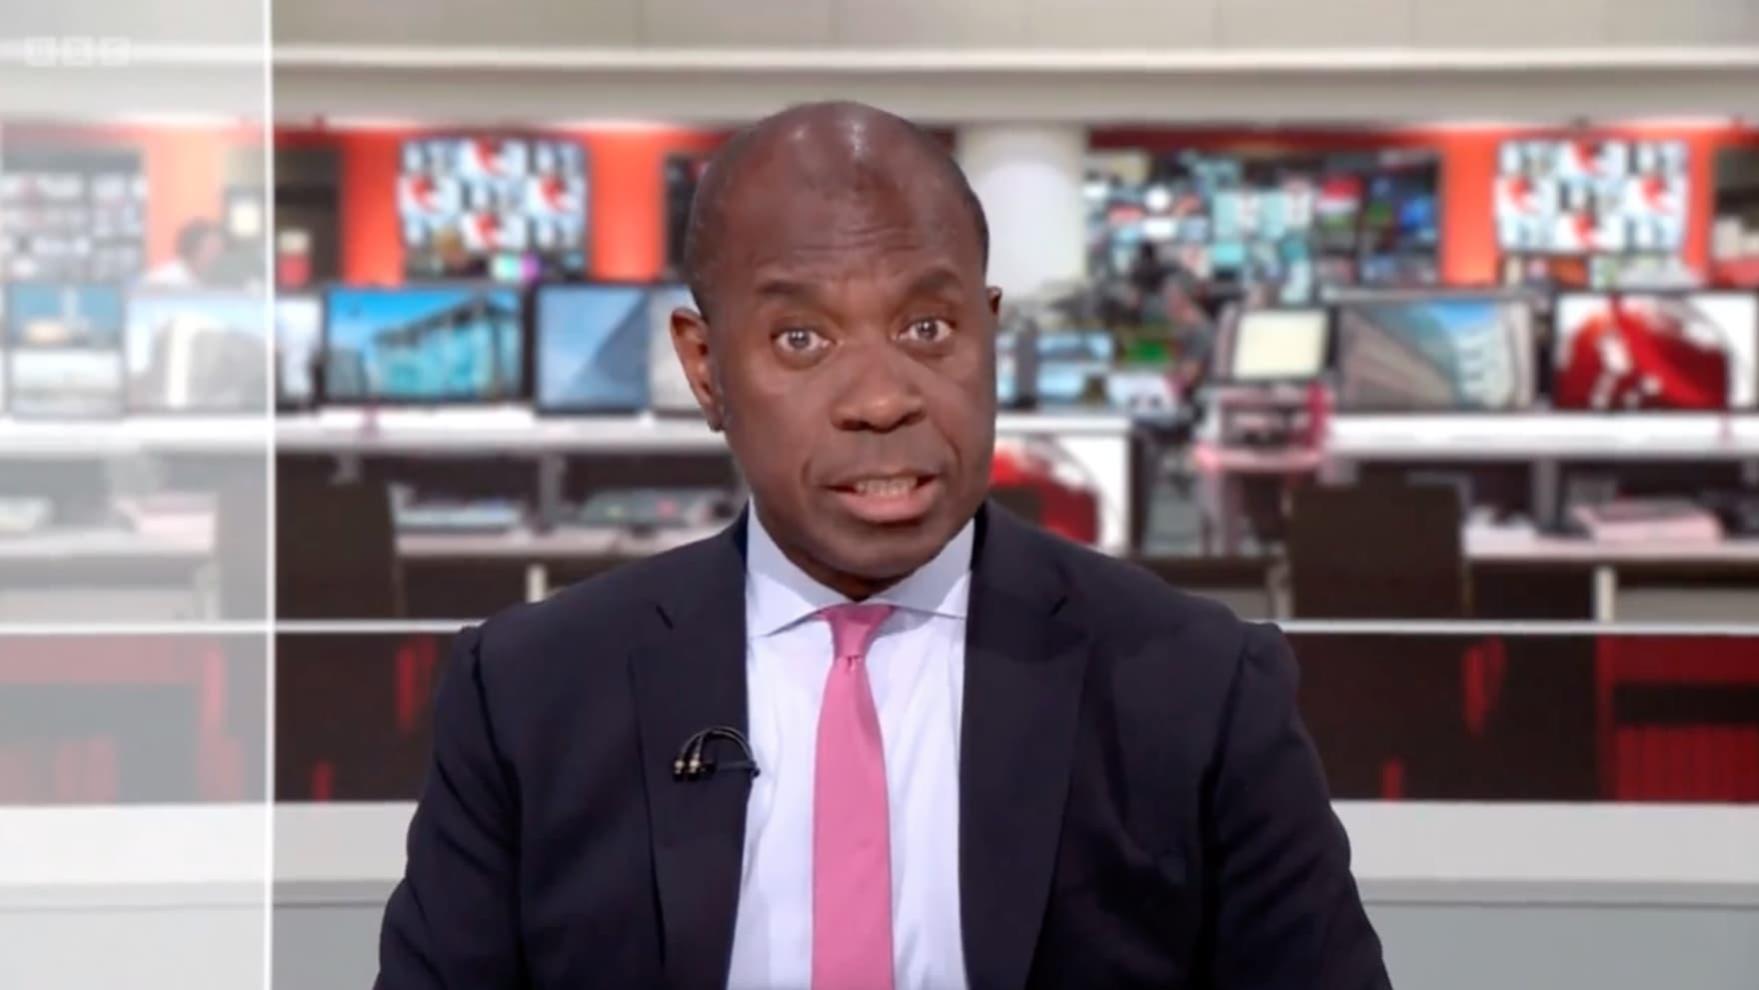 Fans say Clive Myrie had tears in eyes reporting on Huw Edwards